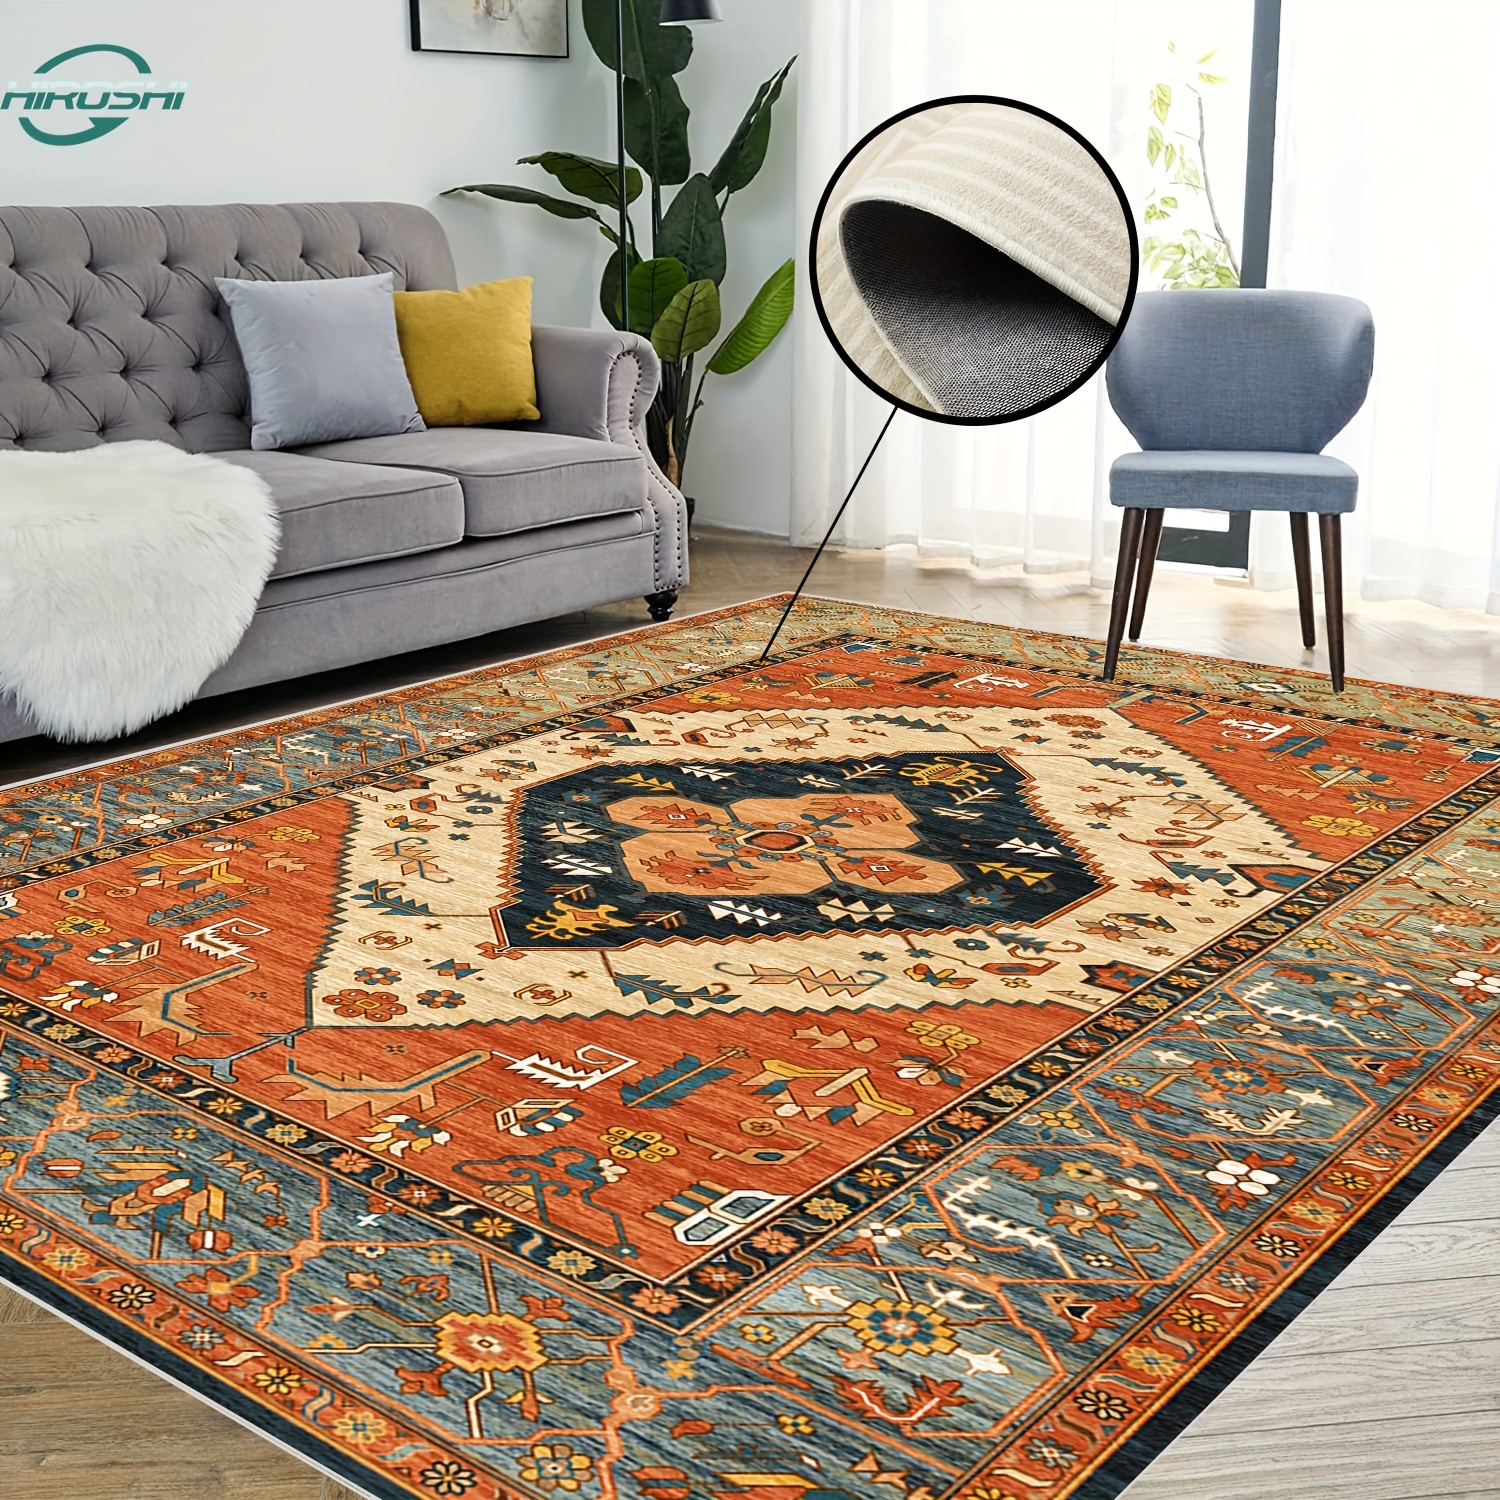 Large Oriental Floor Carpets under Dining Room Table, Luxury Thick and